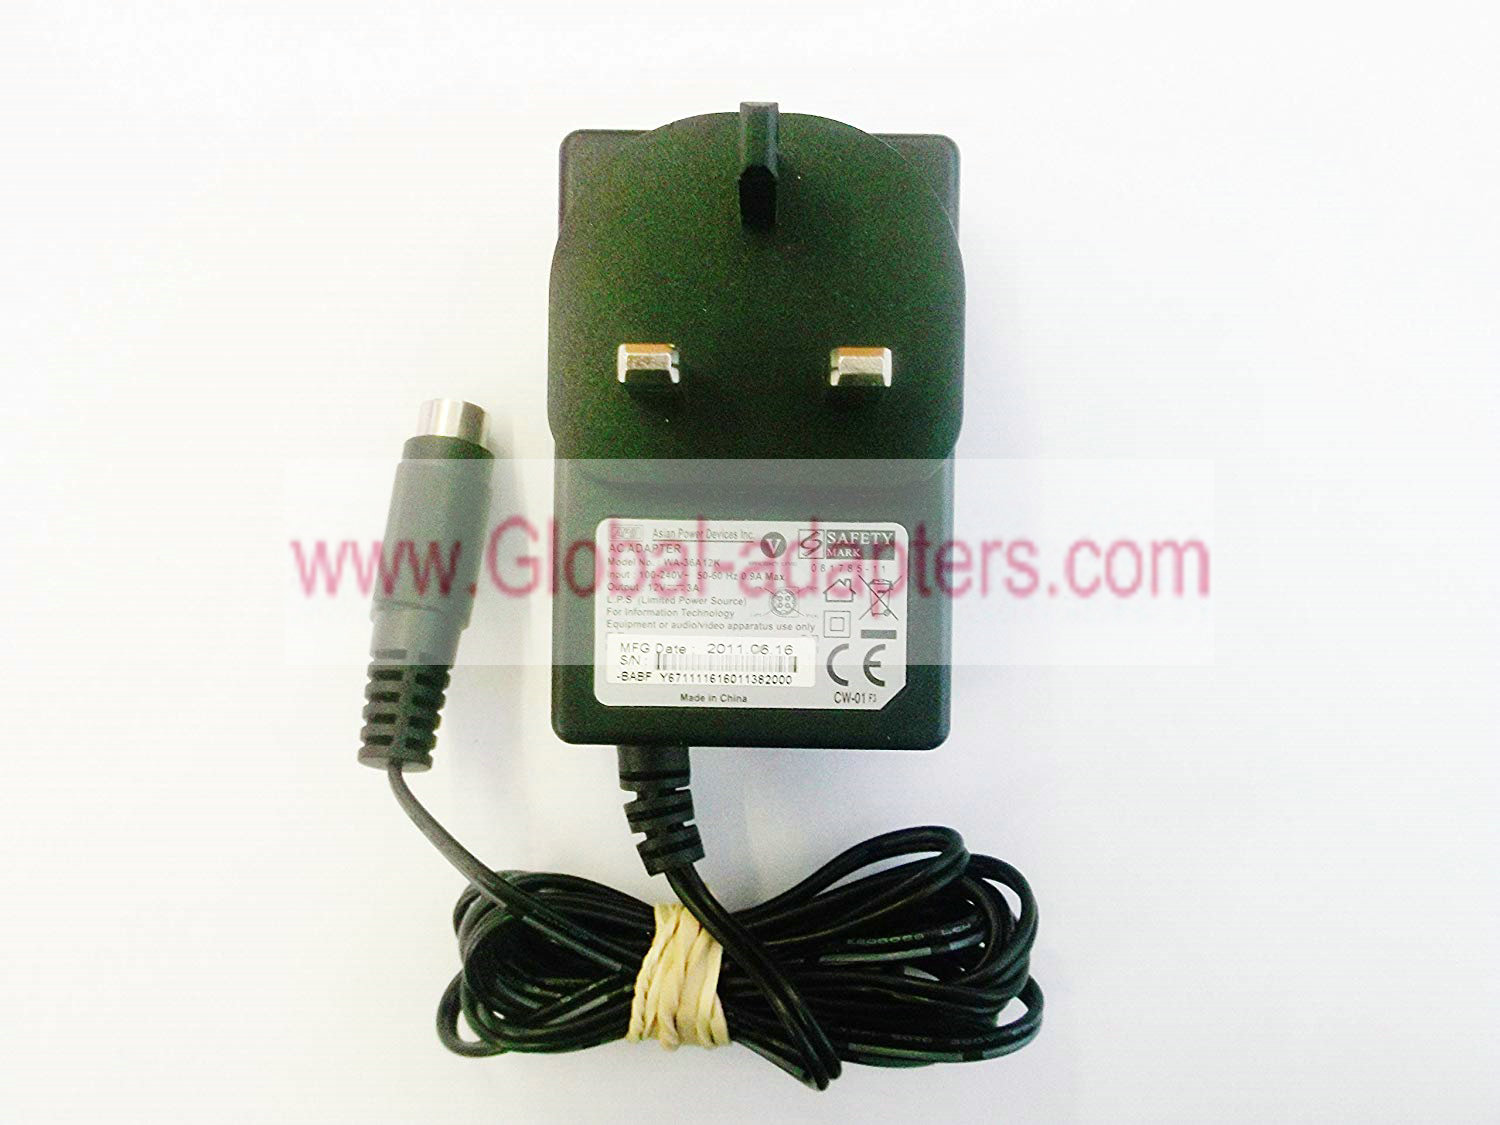 New 12V 3A Power Adapter for APD WA-36A12K TV AC ADAPTER 4 pin